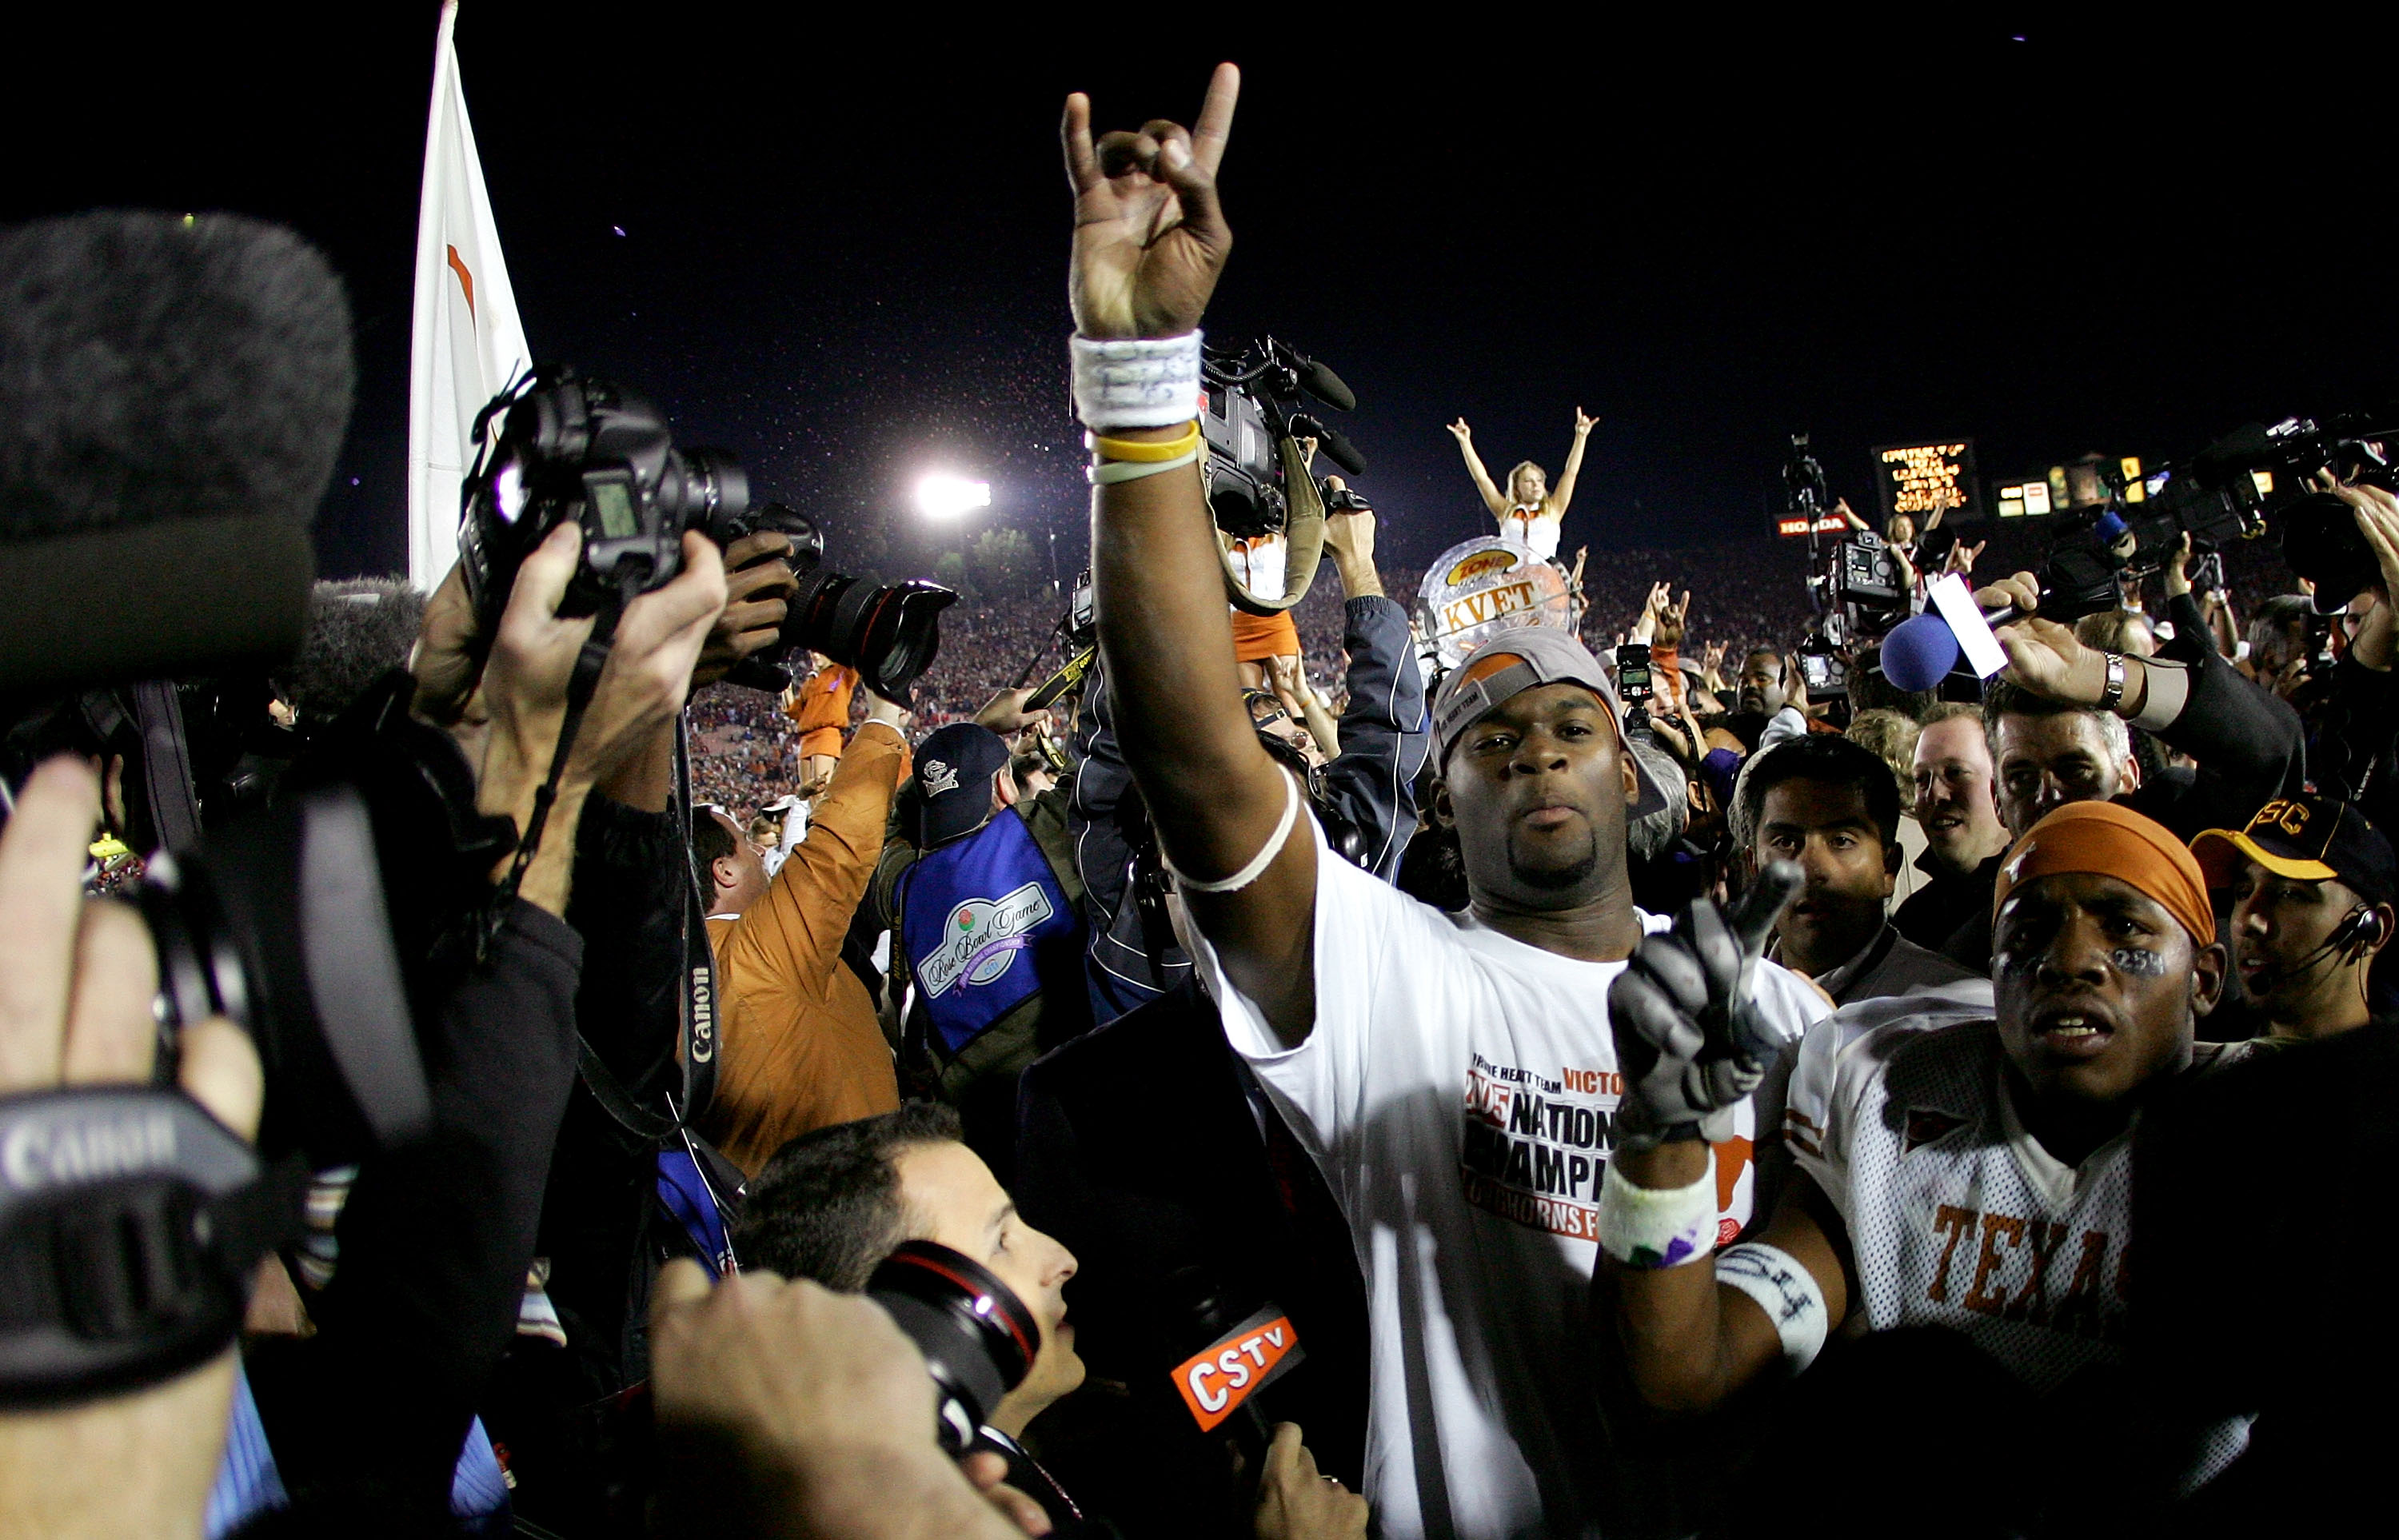 PASADENA, CA - JANUARY 04:  Quarterback Vince Young #10 of the Texas Longhorns celebrates after defeating the USC Trojans in the final moments of the BCS National Championship Rose Bowl Game at the Rose Bowl on January 4, 2006 in Pasadena, California.  Te